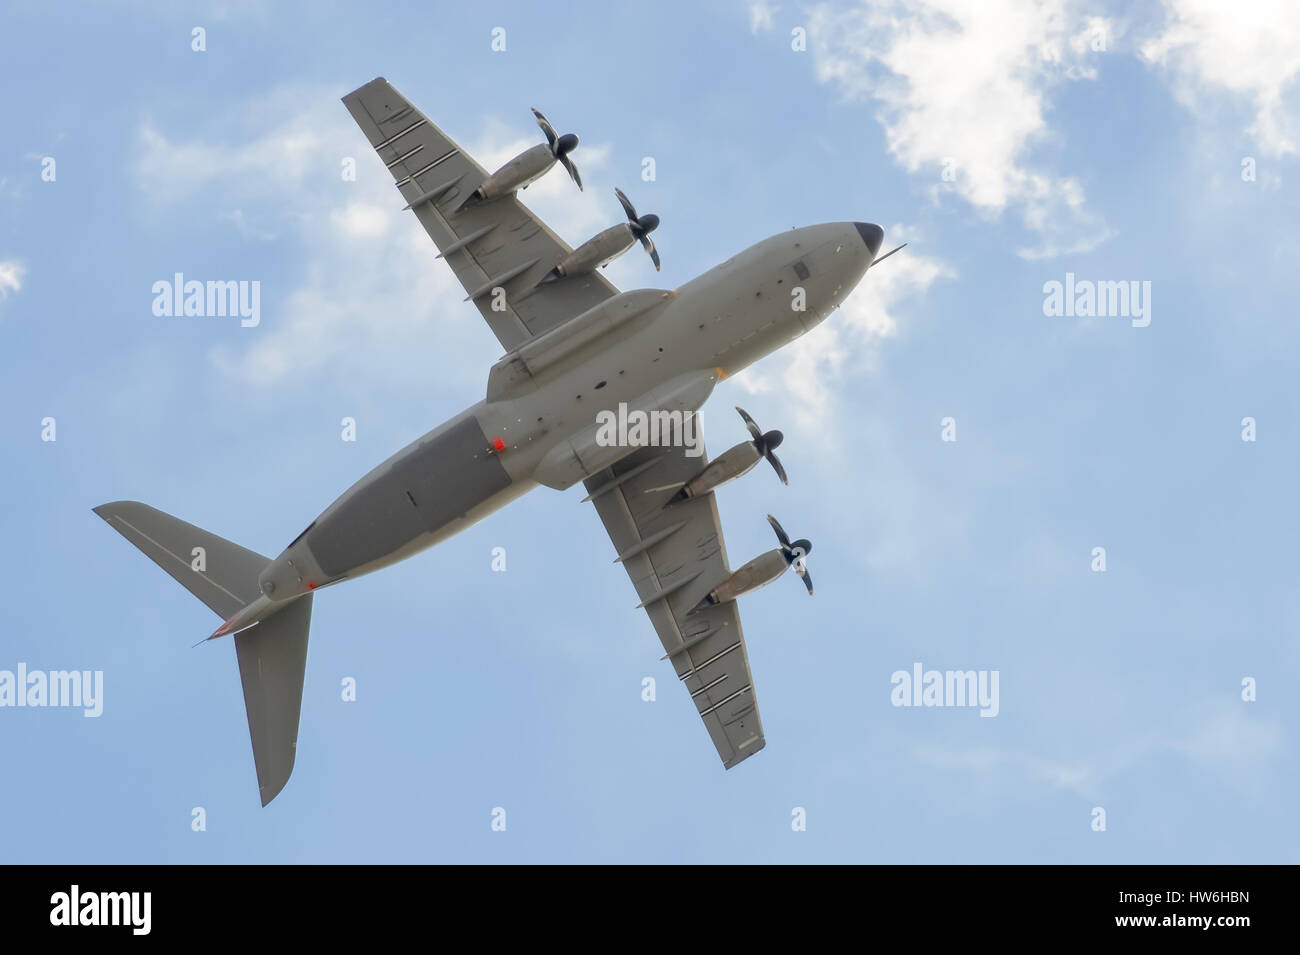 Large Airbus A400M military transporter aircraft showing aerobatic capabilities at the Farnborough Airshow, UK Stock Photo